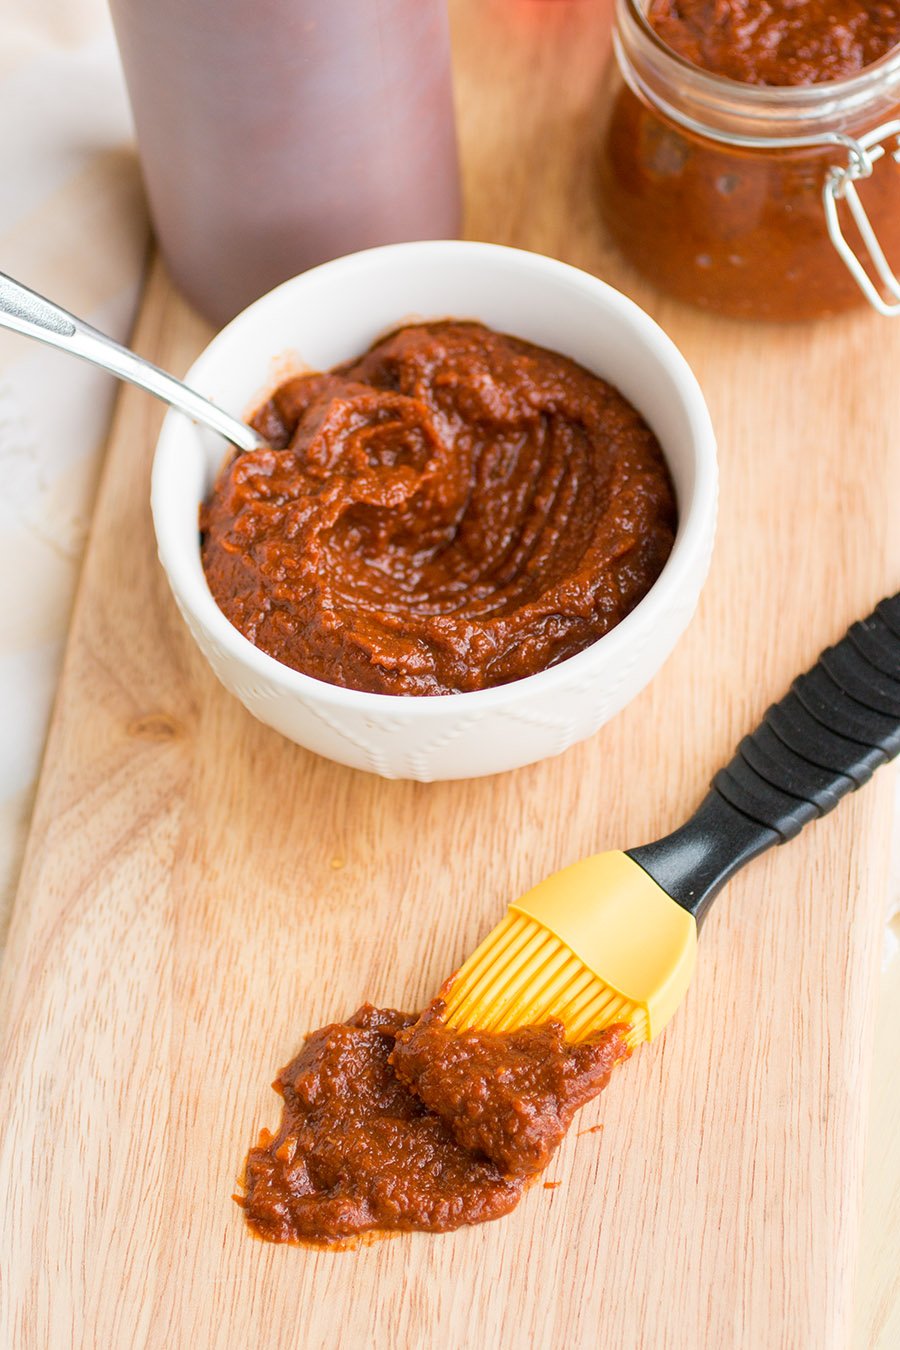 Chipotle-Bacon-Bourbon Barbecue Sauce served in a big white bowl